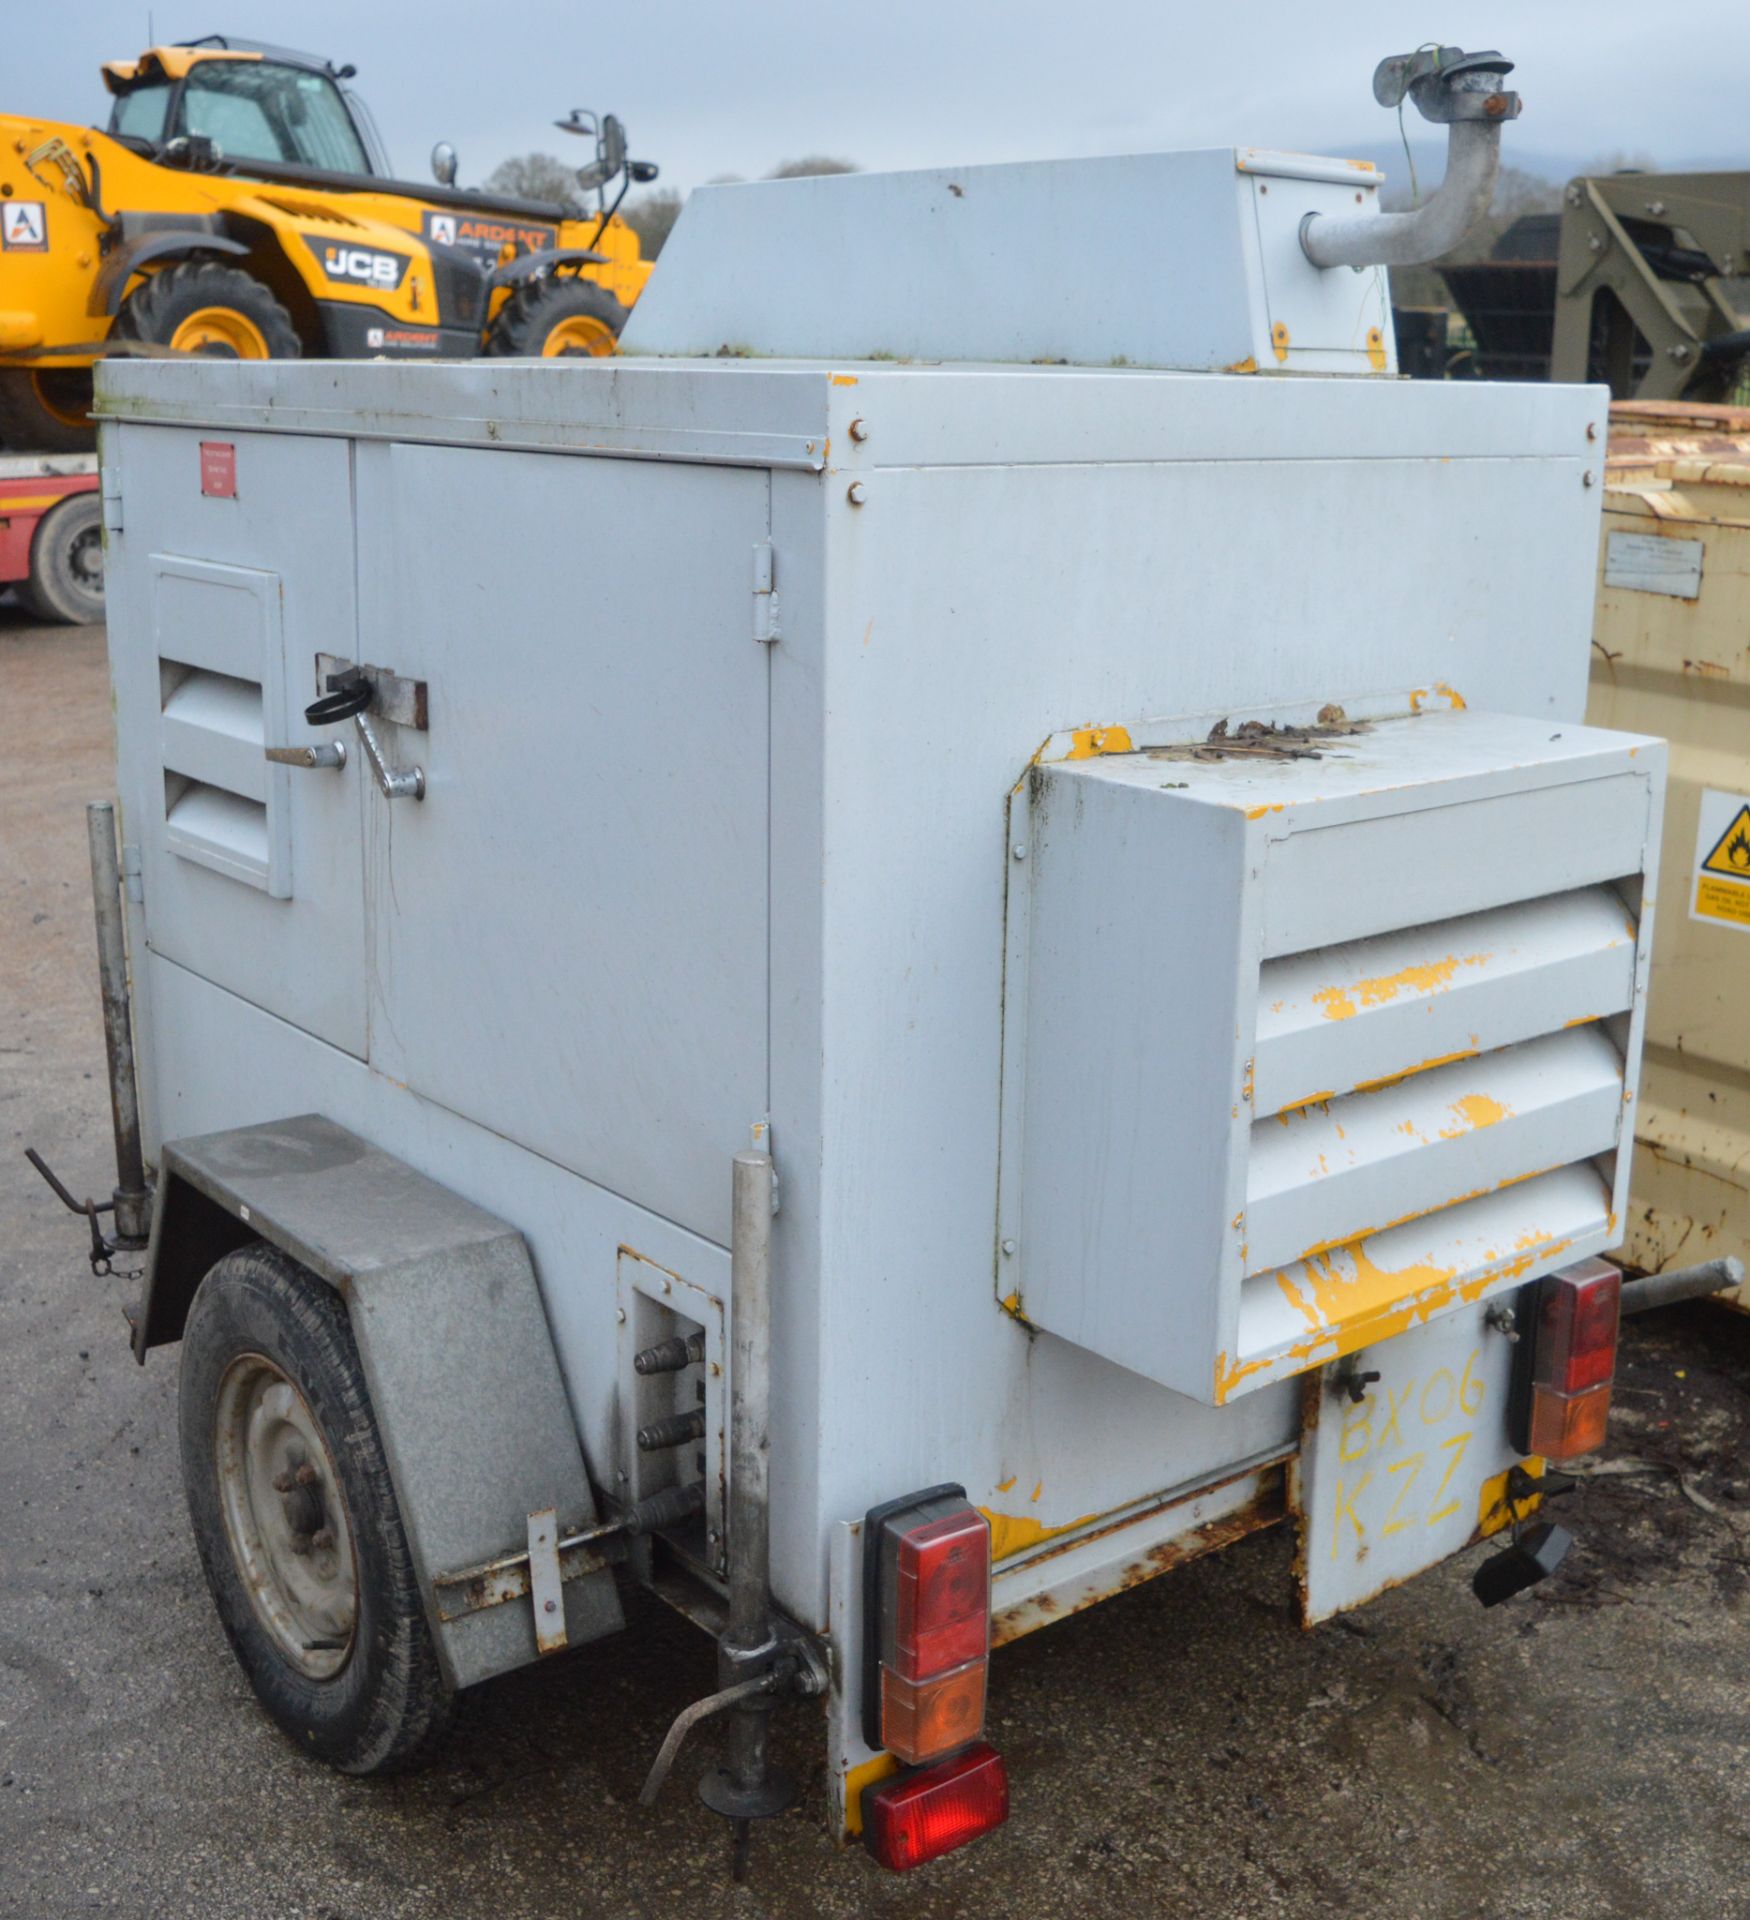 Broadcrown BCL10 10kva 240v diesel driven fast tow mobile generator - Image 2 of 3